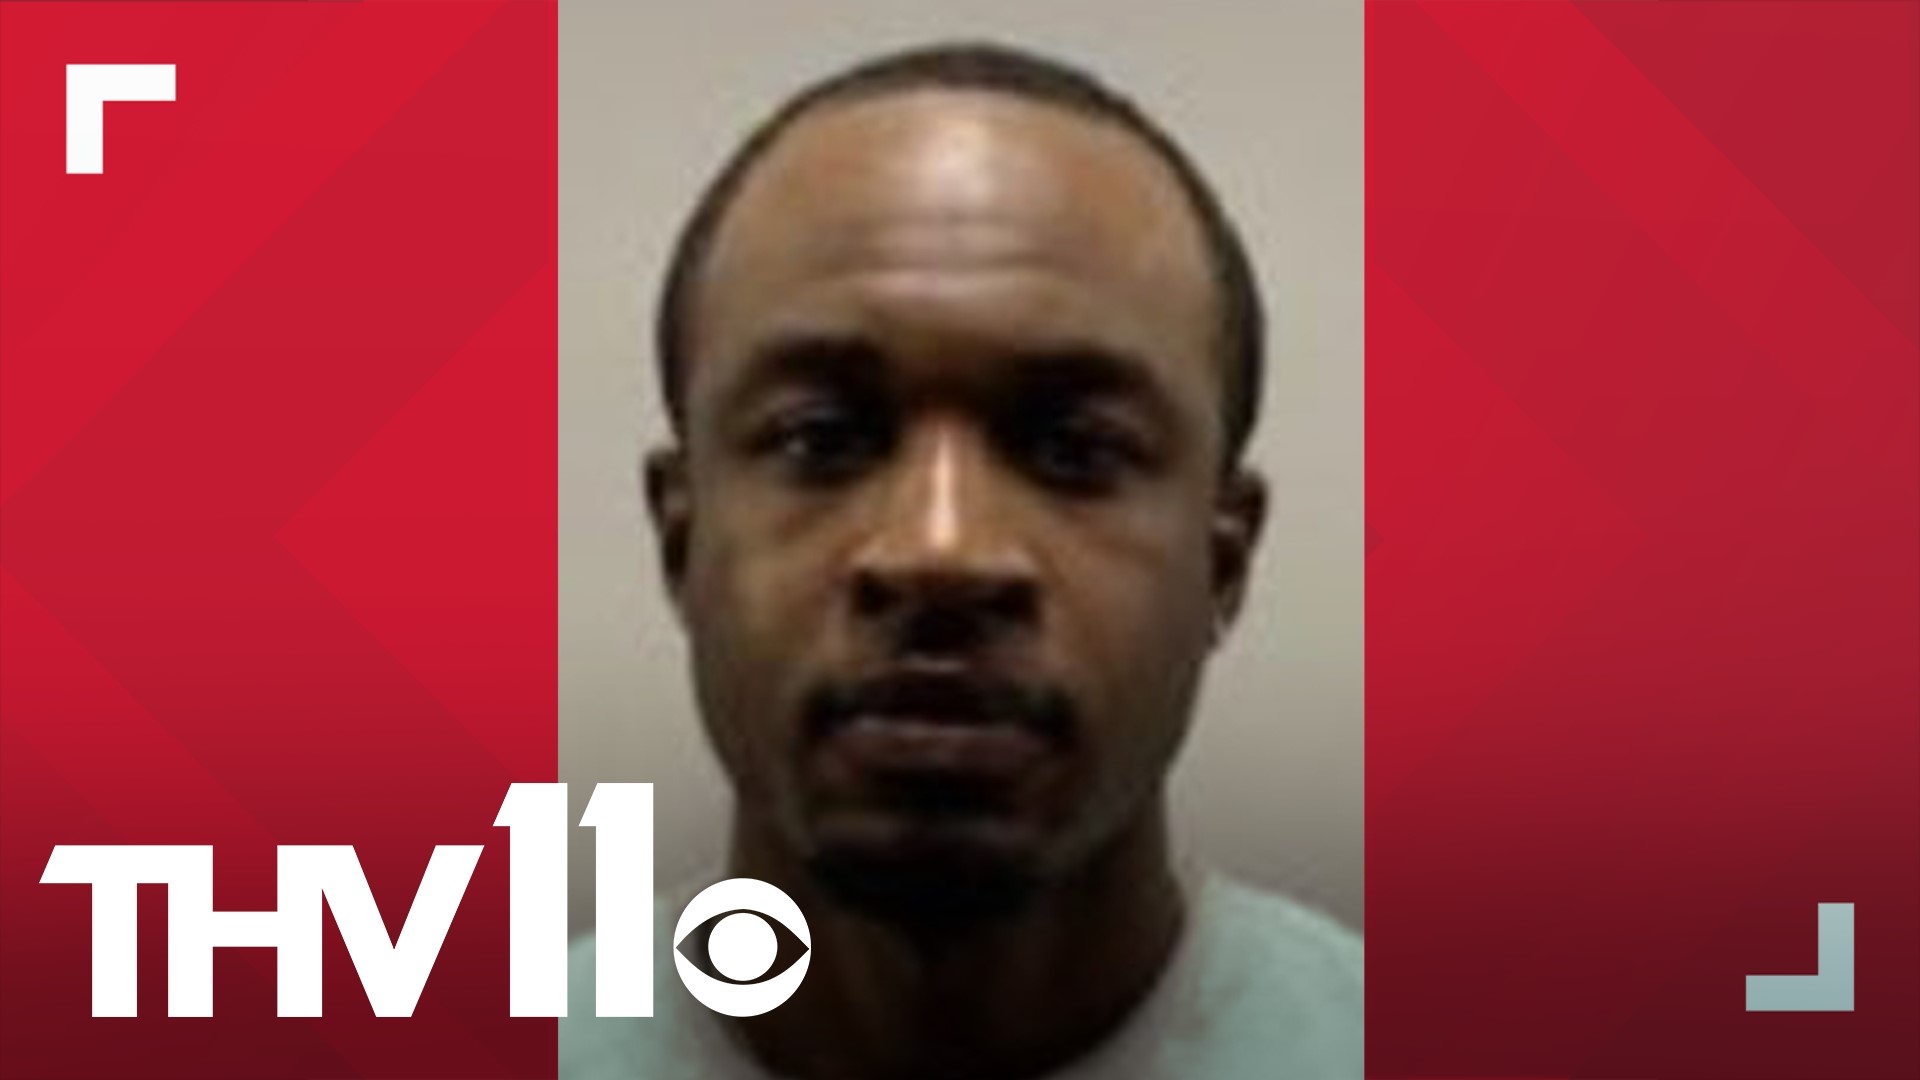 U.S. Marshals say the 31-year-old Arkansas man has been on the run for almost a year and is wanted on several felony charges in multiple cities.